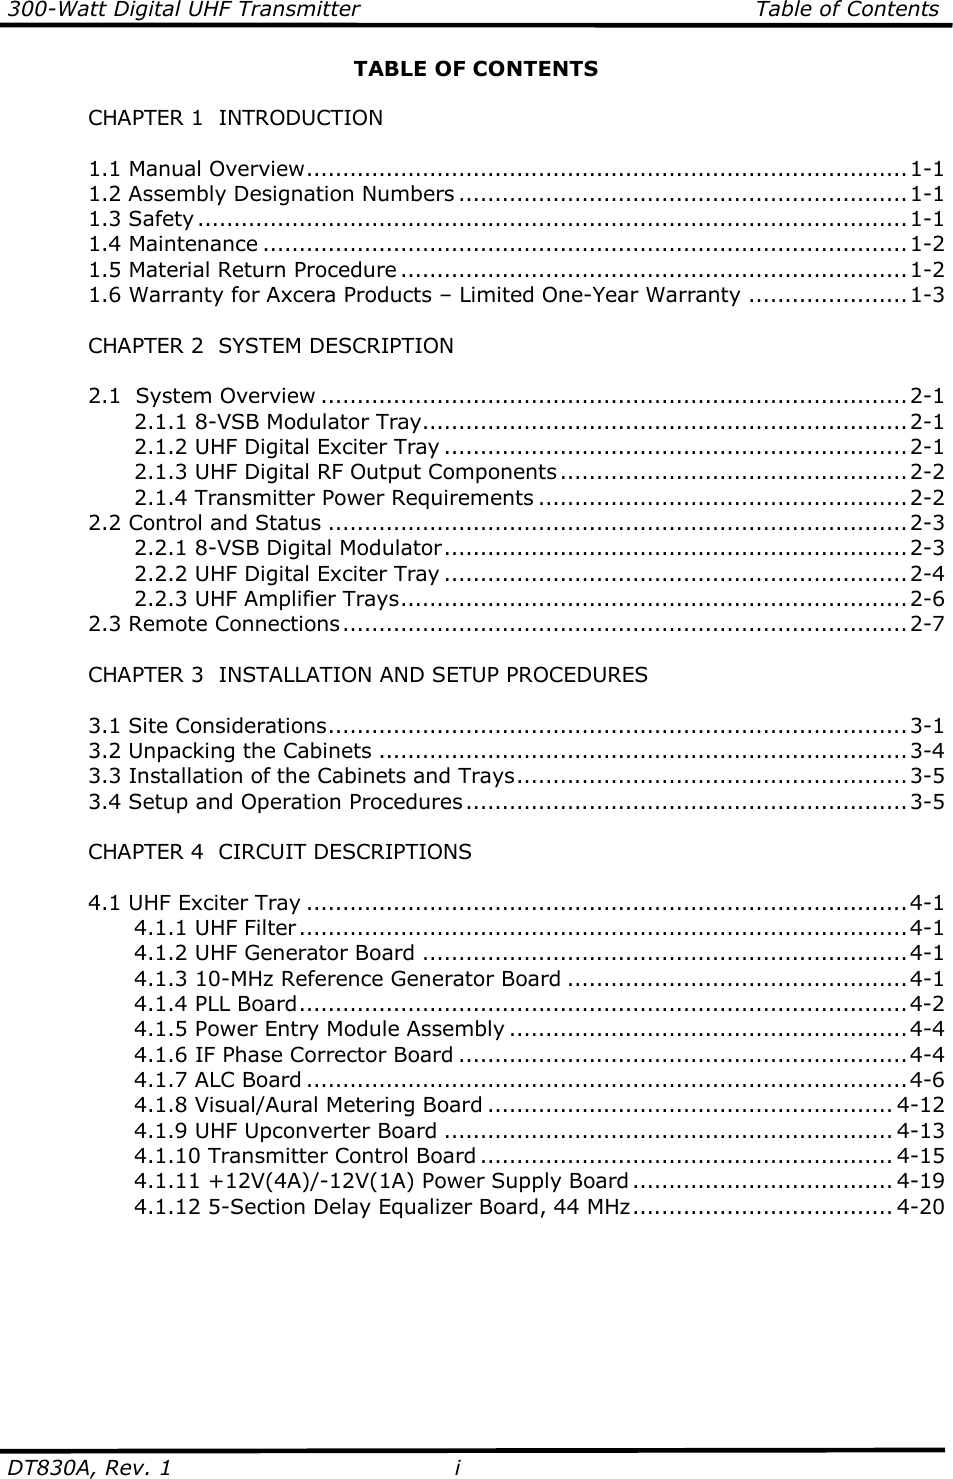 300-Watt Digital UHF Transmitter                                                      Table of Contents  DT830A, Rev. 1  i   TABLE OF CONTENTS    CHAPTER 1  INTRODUCTION    1.1 Manual Overview...................................................................................1-1   1.2 Assembly Designation Numbers ..............................................................1-1   1.3 Safety..................................................................................................1-1   1.4 Maintenance .........................................................................................1-2   1.5 Material Return Procedure ......................................................................1-2   1.6 Warranty for Axcera Products – Limited One-Year Warranty ......................1-3    CHAPTER 2  SYSTEM DESCRIPTION    2.1  System Overview .................................................................................2-1     2.1.1 8-VSB Modulator Tray...................................................................2-1     2.1.2 UHF Digital Exciter Tray ................................................................2-1     2.1.3 UHF Digital RF Output Components................................................2-2     2.1.4 Transmitter Power Requirements ...................................................2-2   2.2 Control and Status ................................................................................2-3     2.2.1 8-VSB Digital Modulator................................................................2-3     2.2.2 UHF Digital Exciter Tray ................................................................2-4     2.2.3 UHF Amplifier Trays......................................................................2-6   2.3 Remote Connections..............................................................................2-7        CHAPTER 3  INSTALLATION AND SETUP PROCEDURES      3.1 Site Considerations................................................................................3-1   3.2 Unpacking the Cabinets .........................................................................3-4   3.3 Installation of the Cabinets and Trays......................................................3-5   3.4 Setup and Operation Procedures.............................................................3-5    CHAPTER 4  CIRCUIT DESCRIPTIONS    4.1 UHF Exciter Tray ...................................................................................4-1     4.1.1 UHF Filter....................................................................................4-1     4.1.2 UHF Generator Board ...................................................................4-1     4.1.3 10-MHz Reference Generator Board ...............................................4-1     4.1.4 PLL Board....................................................................................4-2     4.1.5 Power Entry Module Assembly .......................................................4-4     4.1.6 IF Phase Corrector Board ..............................................................4-4     4.1.7 ALC Board ...................................................................................4-6     4.1.8 Visual/Aural Metering Board ........................................................ 4-12     4.1.9 UHF Upconverter Board .............................................................. 4-13     4.1.10 Transmitter Control Board ......................................................... 4-15     4.1.11 +12V(4A)/-12V(1A) Power Supply Board .................................... 4-19     4.1.12 5-Section Delay Equalizer Board, 44 MHz.................................... 4-20    